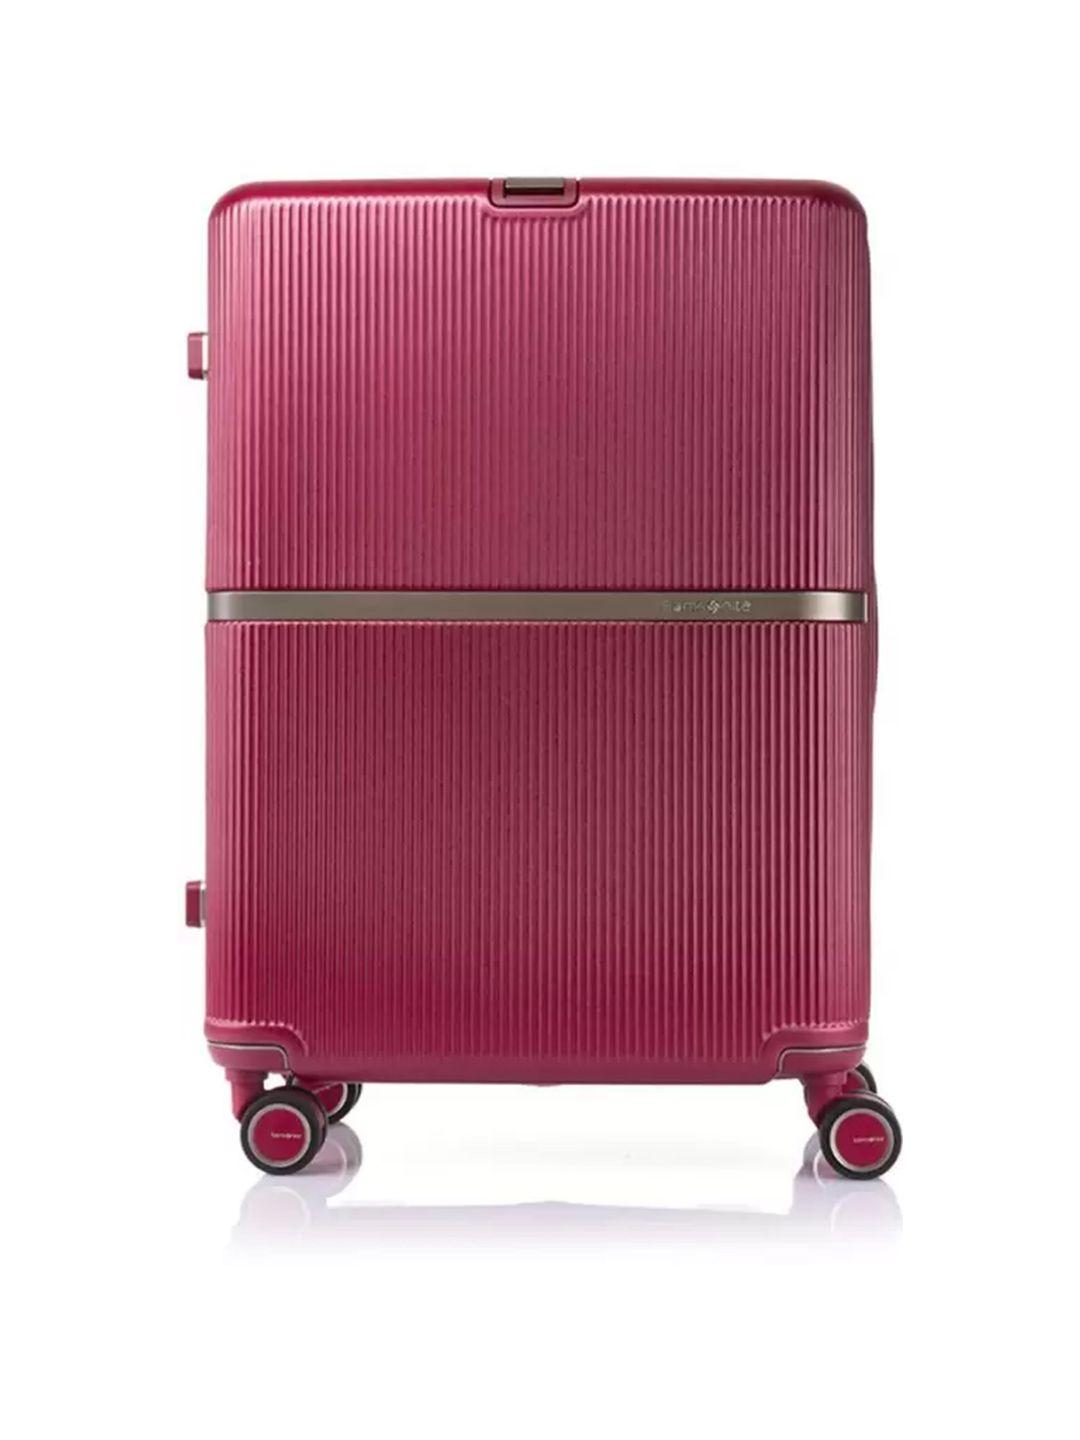 samsonite red textured hard-sided large trolley suitcase